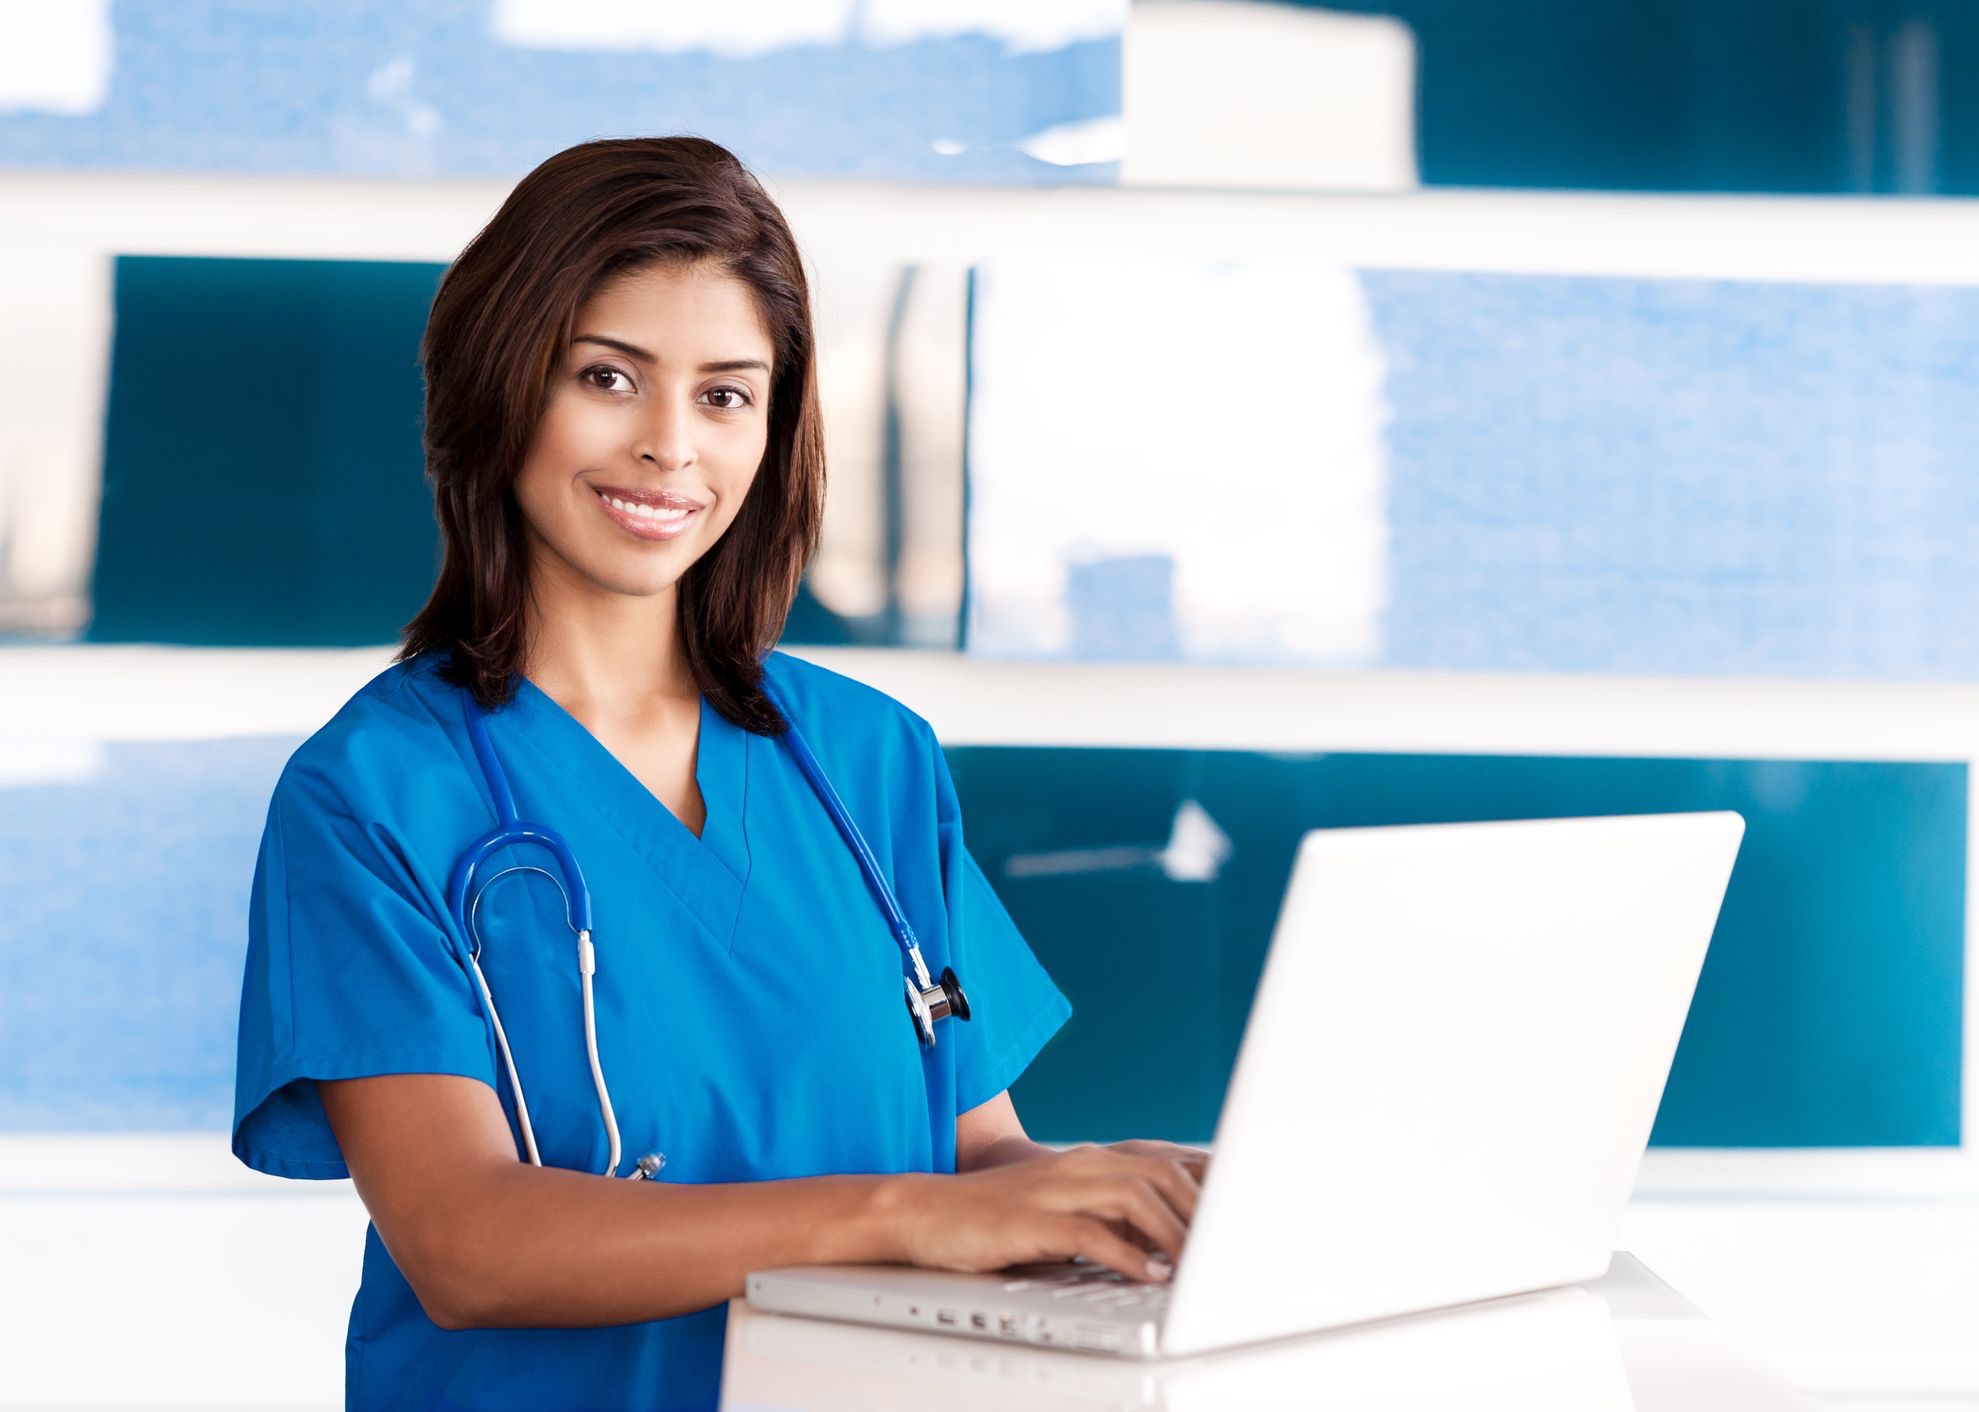 Training to become a medical assistant in San Antonio could be the right for you.